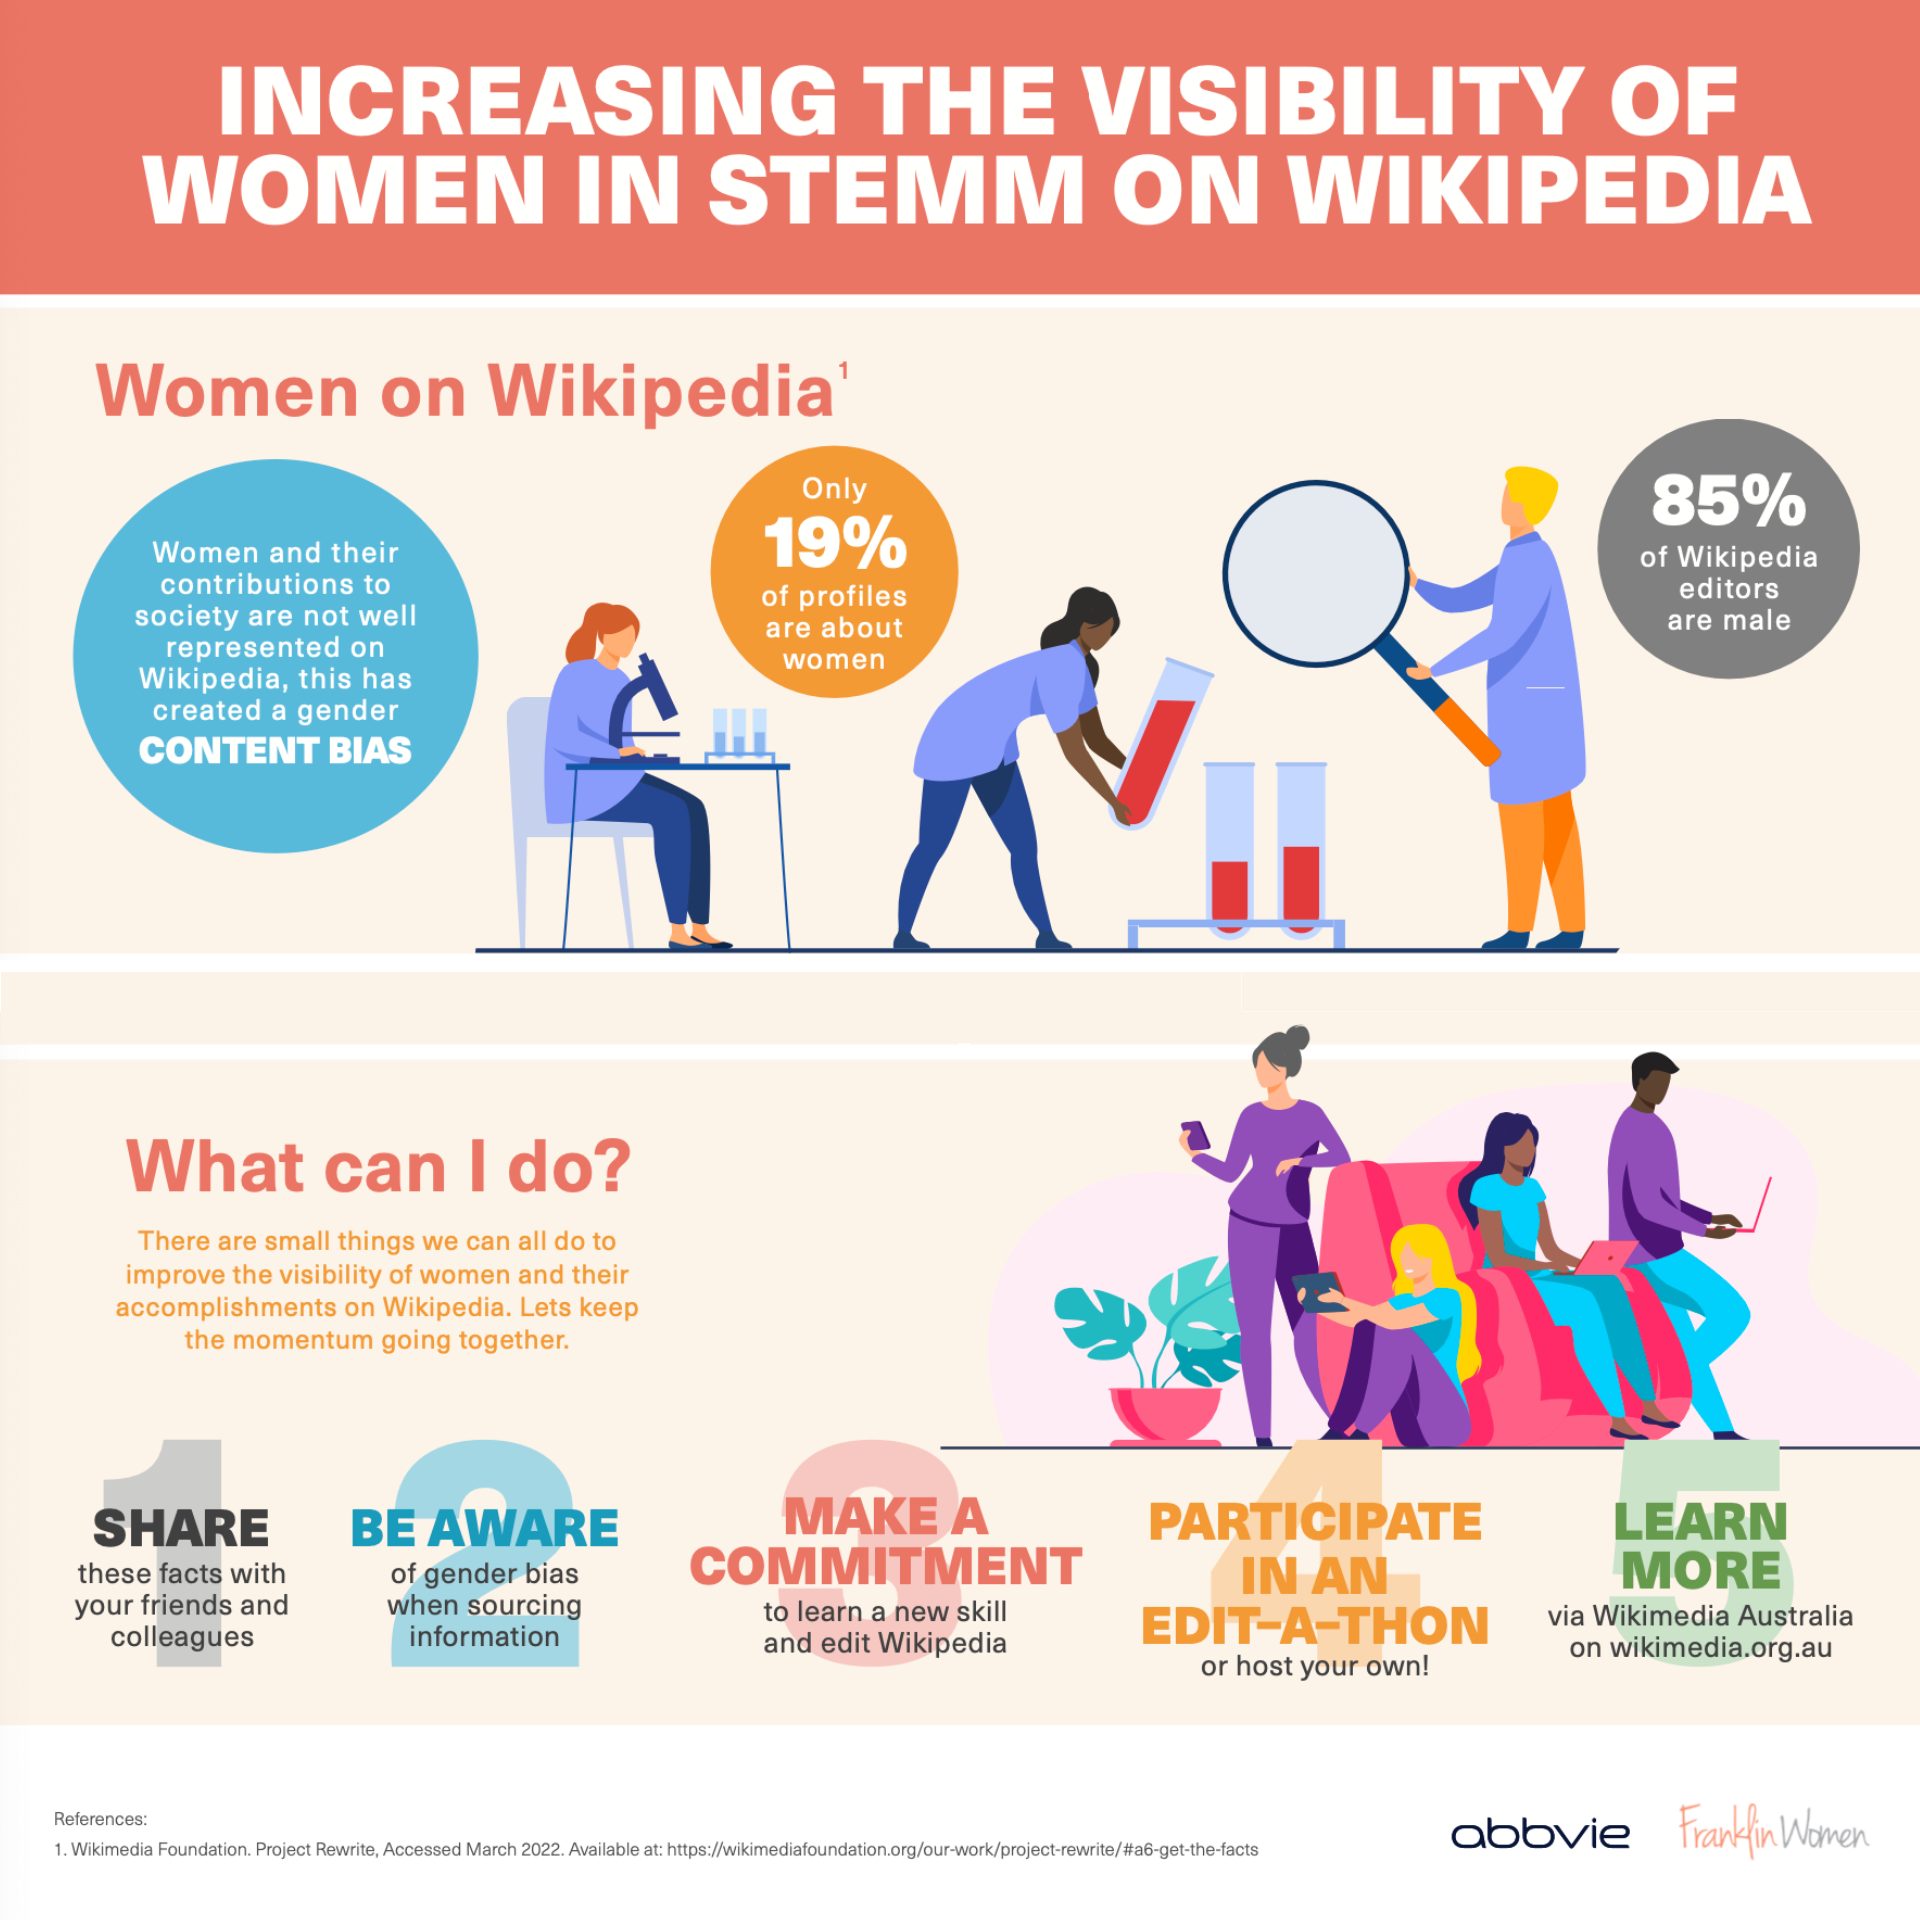 Infographic titled: Increasing the visibility of Women in STEMM on Wikipedia. The first panel heading is Women on Wikipedia. It states that women and their contributions to society are not well represented on Wikipedia and this has created a gender content bias. Only 19% of profiles are about women and 85% of Wikipedia editors are male. The second panel heading is what can I do? It states that there are many small things we can all do to improve the visibility of women and their accomplishments on Wikipedia. It encourages us to keep the momentum going together through 1 of 5 actions. First, share these facts with your friends and colleagues. Second, be aware of gender bias when sourcing information. Third, make a commitment to learn a new skill and edit Wikipedia. Fourth, participate in an edit-a-thon or host your own. Fifth, and finally, learn more via Wikimedia Australia on wikimedia.org.au. On the footer there is a reference for the statistics in panel 1 from the Wikimedia Foundation, Project Rewrite, accessed in March 2022, as well as logos for both Franklin Women and AbbVie.